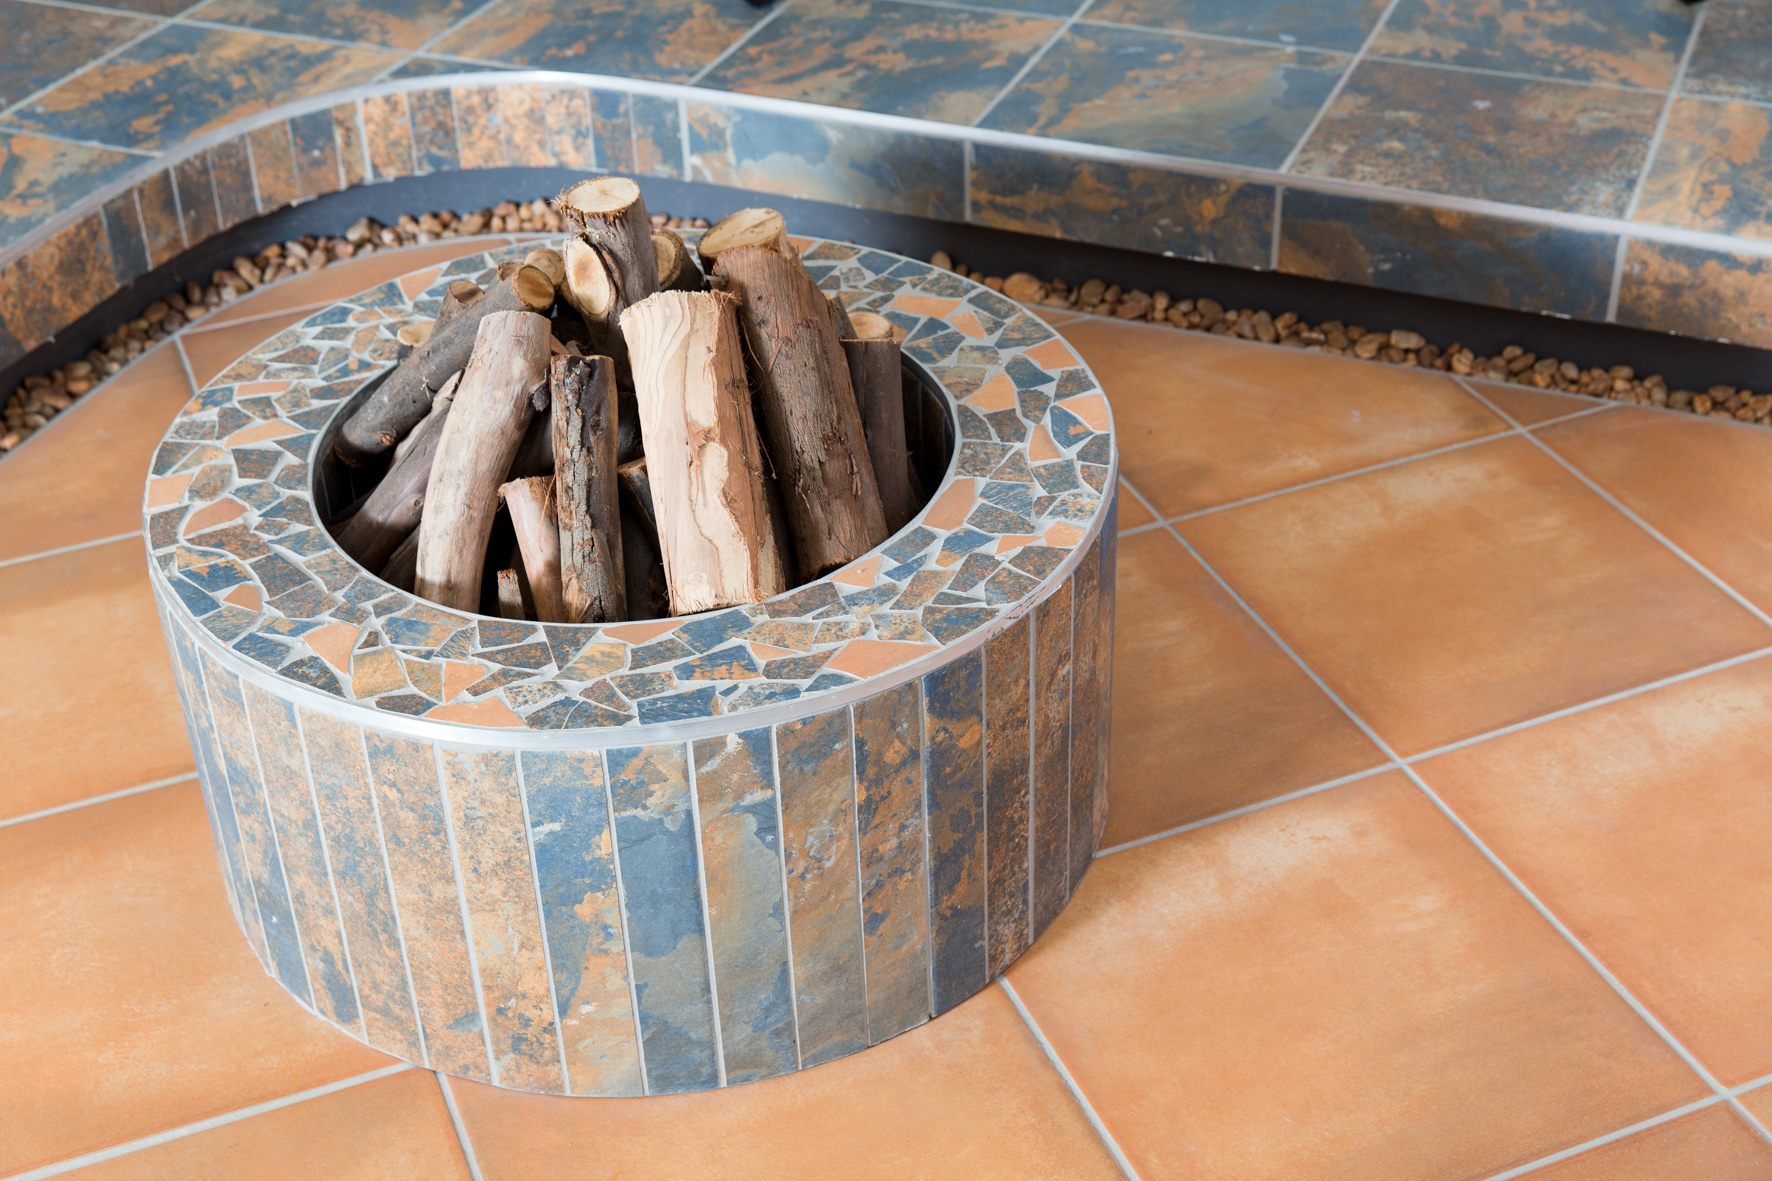 FIVE TOP TIPS FOR TILING AROUND A FIRE PIT